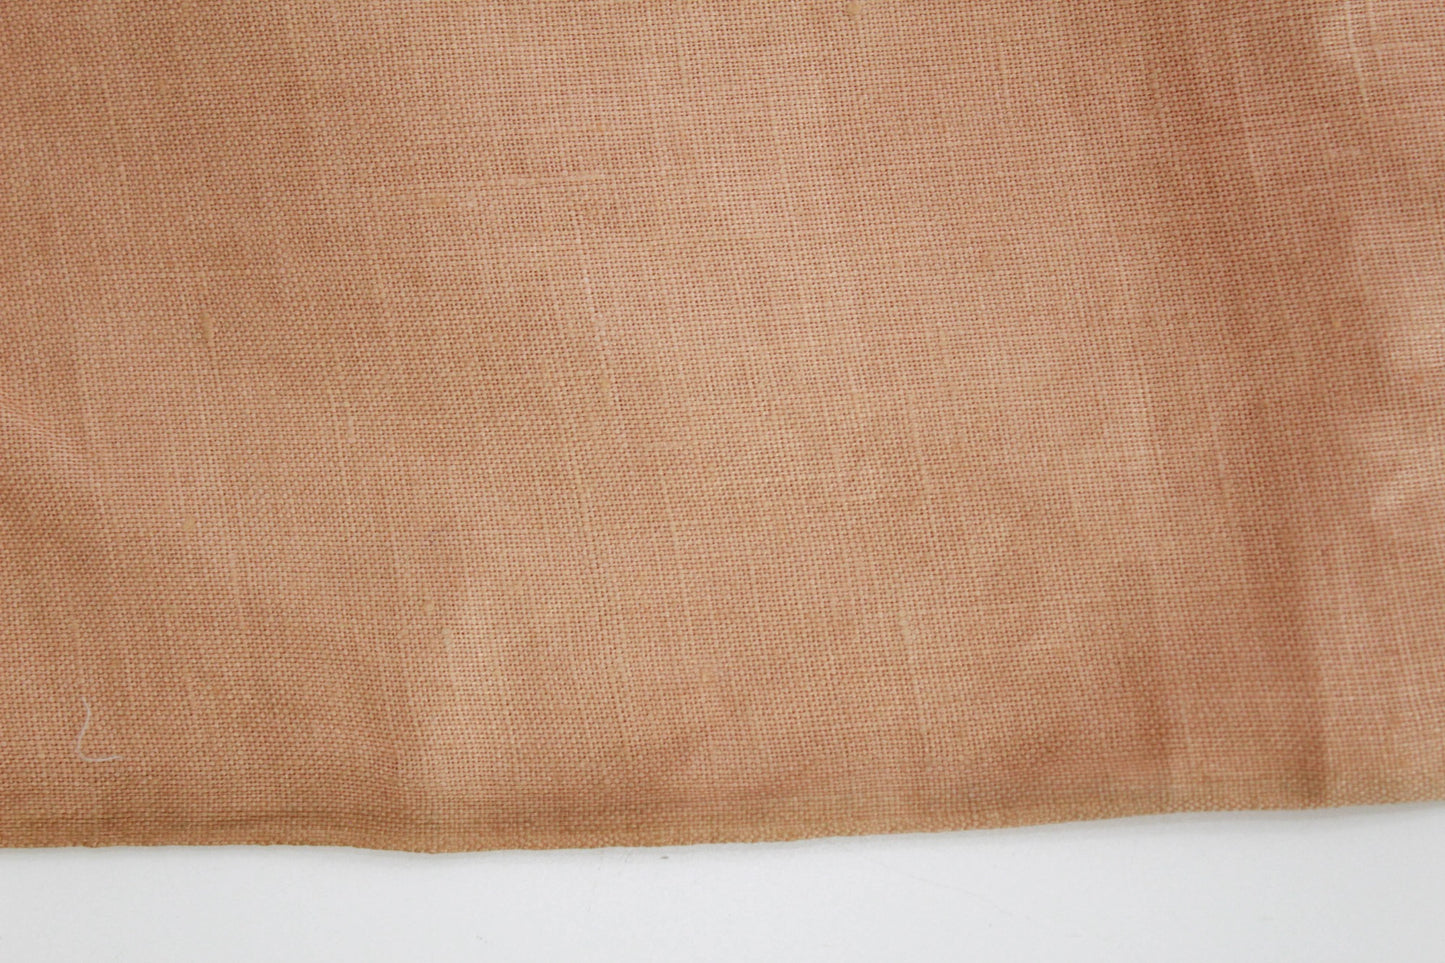 1950s Peach Pink Linen Fabric, 3 Yards Long x 2.2 Yards Wide